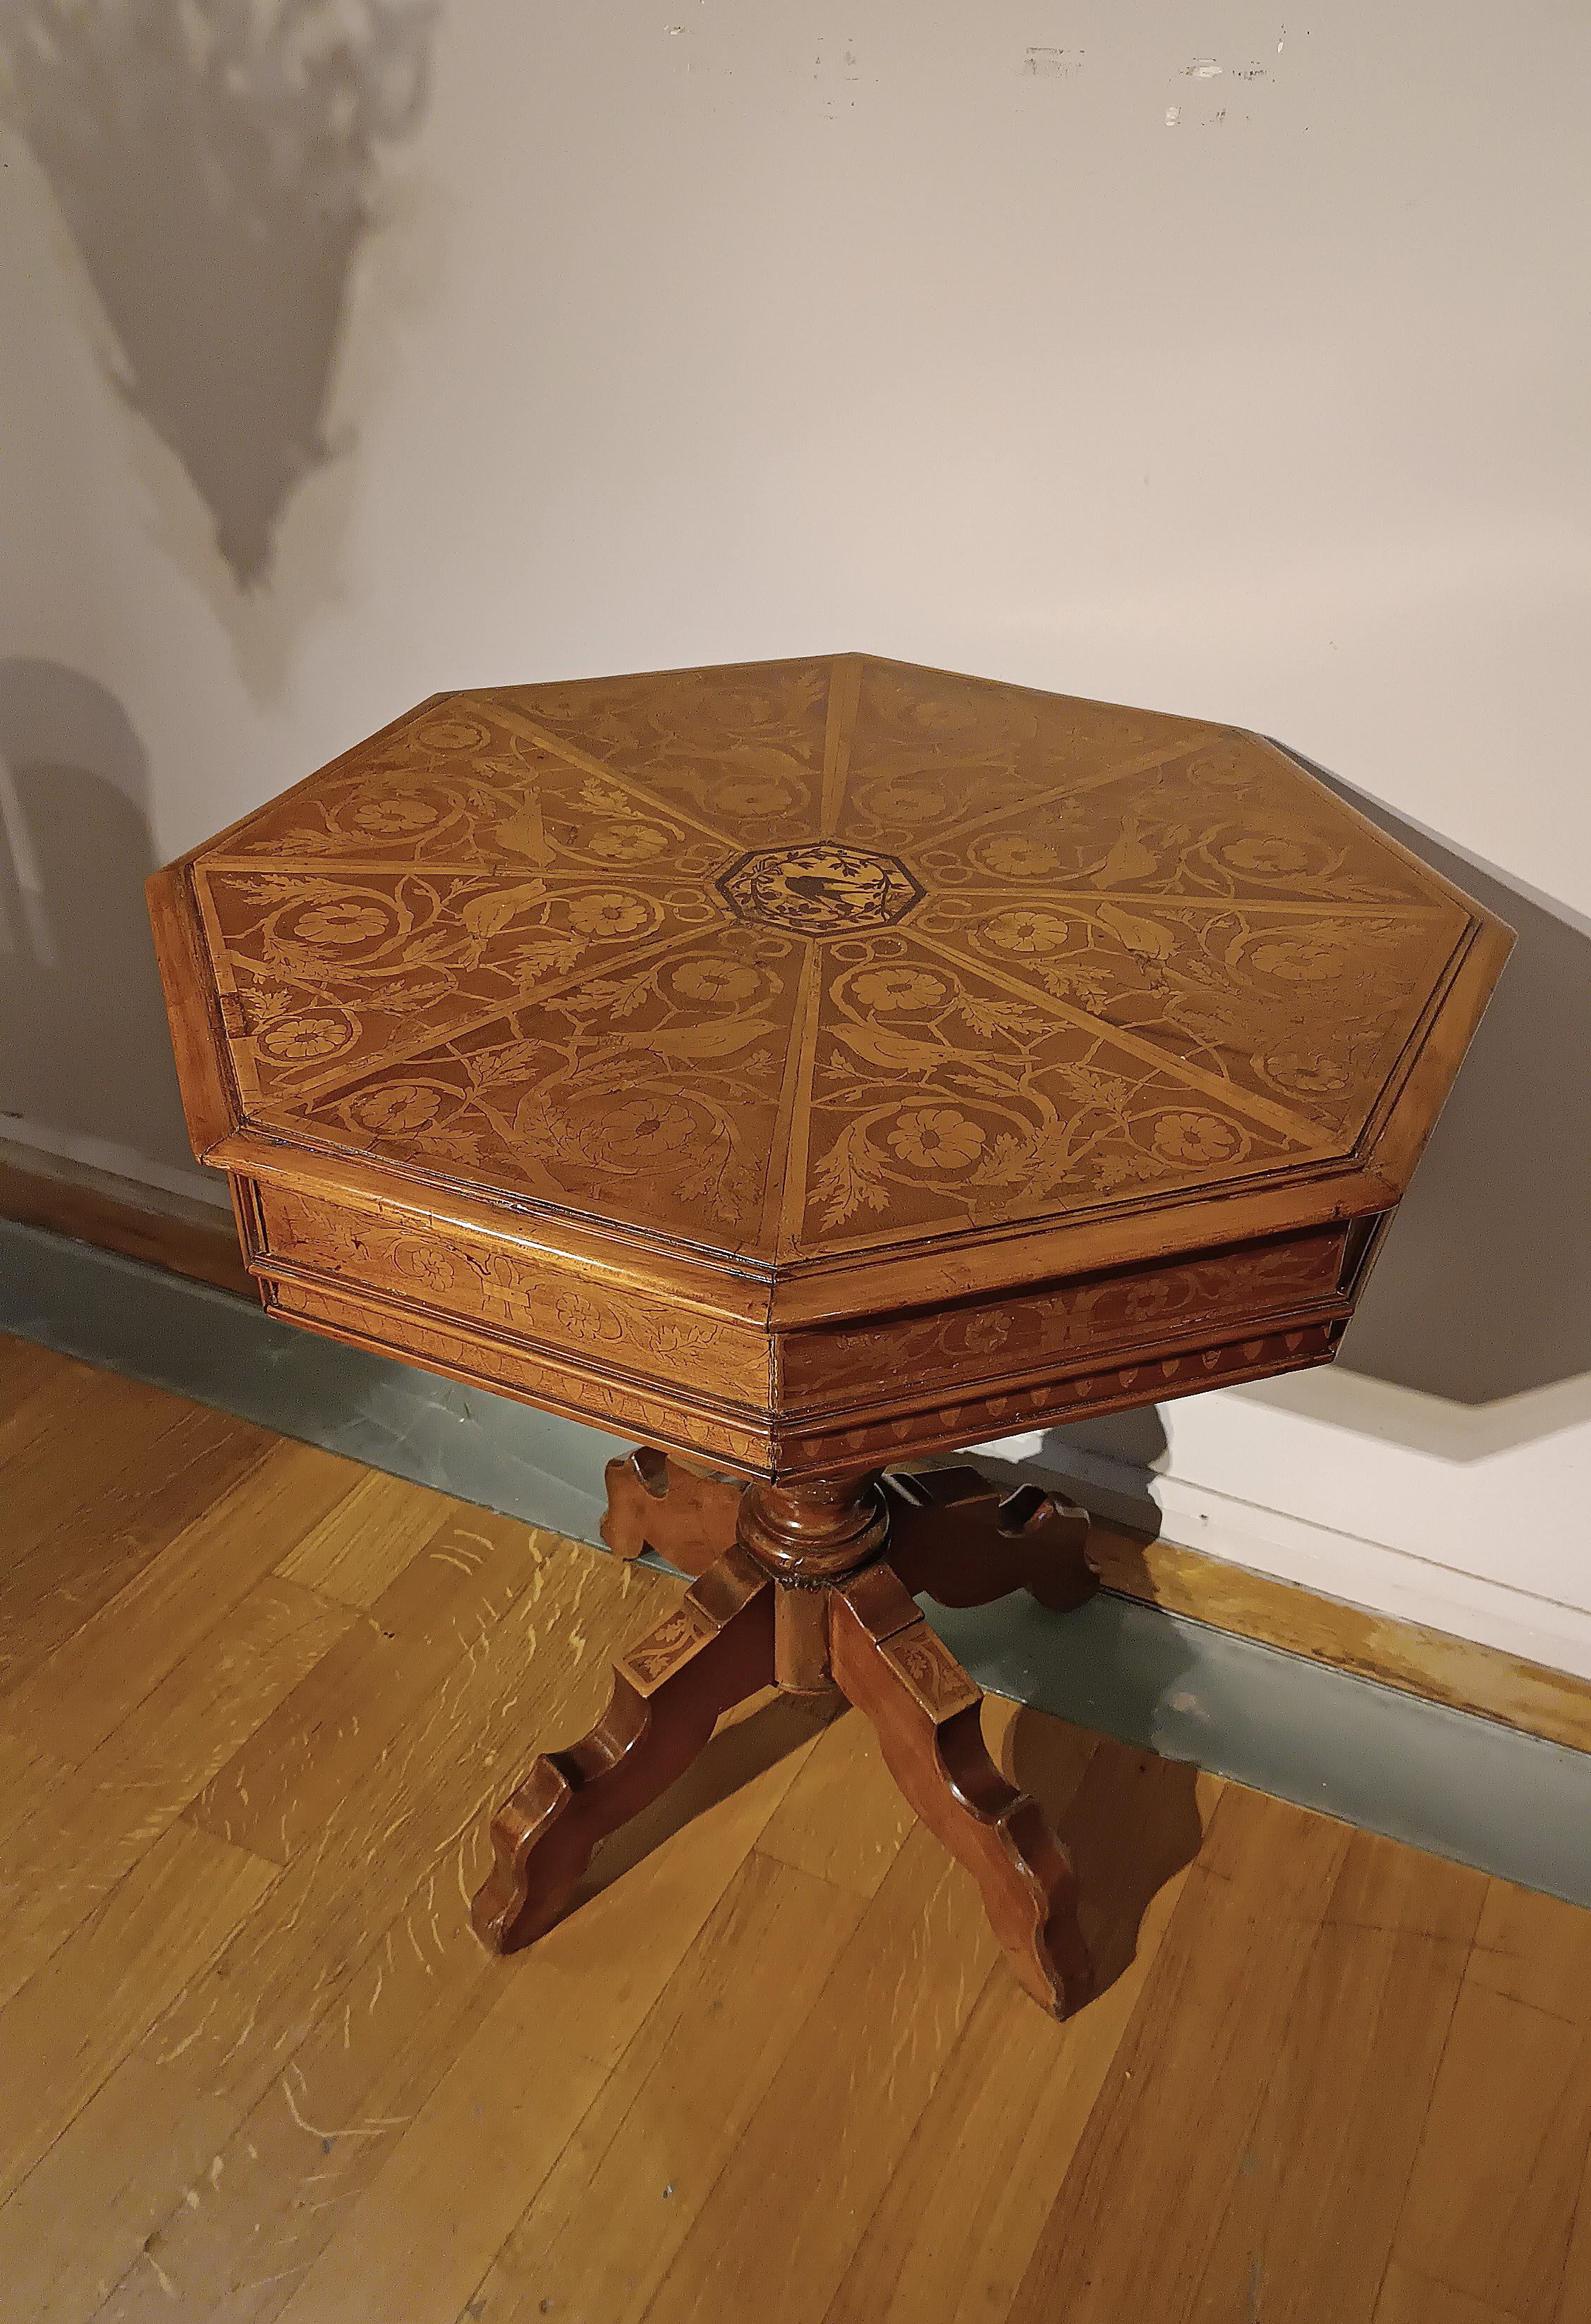 EARLY 19th CENTURY INLAID WALNUT TABLE  For Sale 6